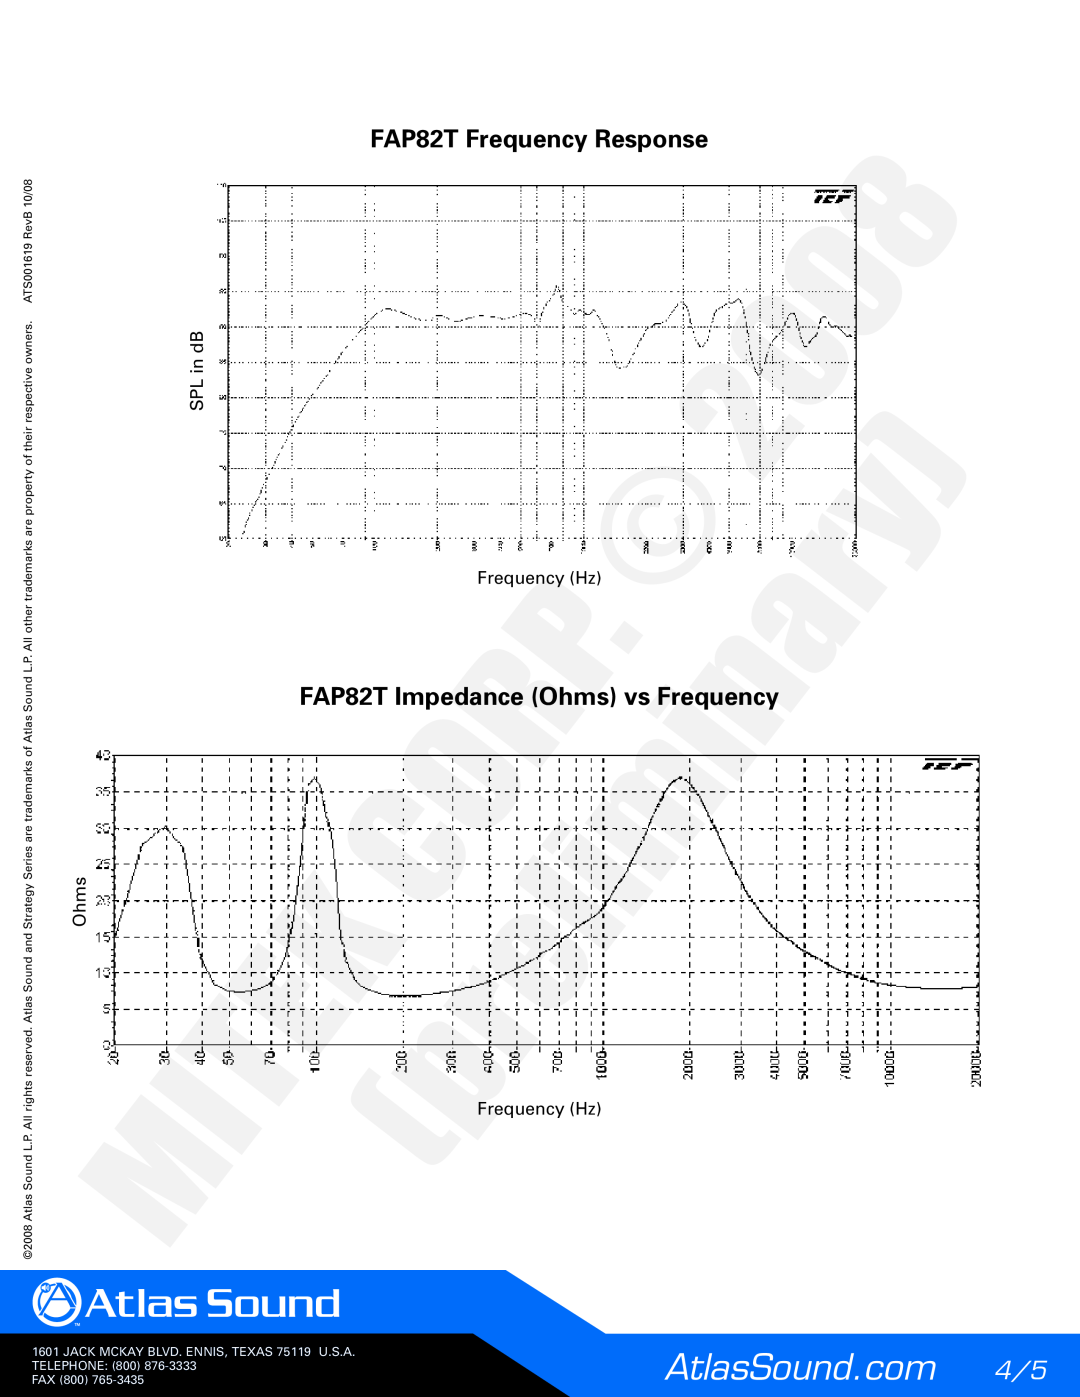 Atlas Sound specifications FAP82T Frequency Response, FAP82T Impedance Ohms vs Freque cy, SPL in dB, Fax 